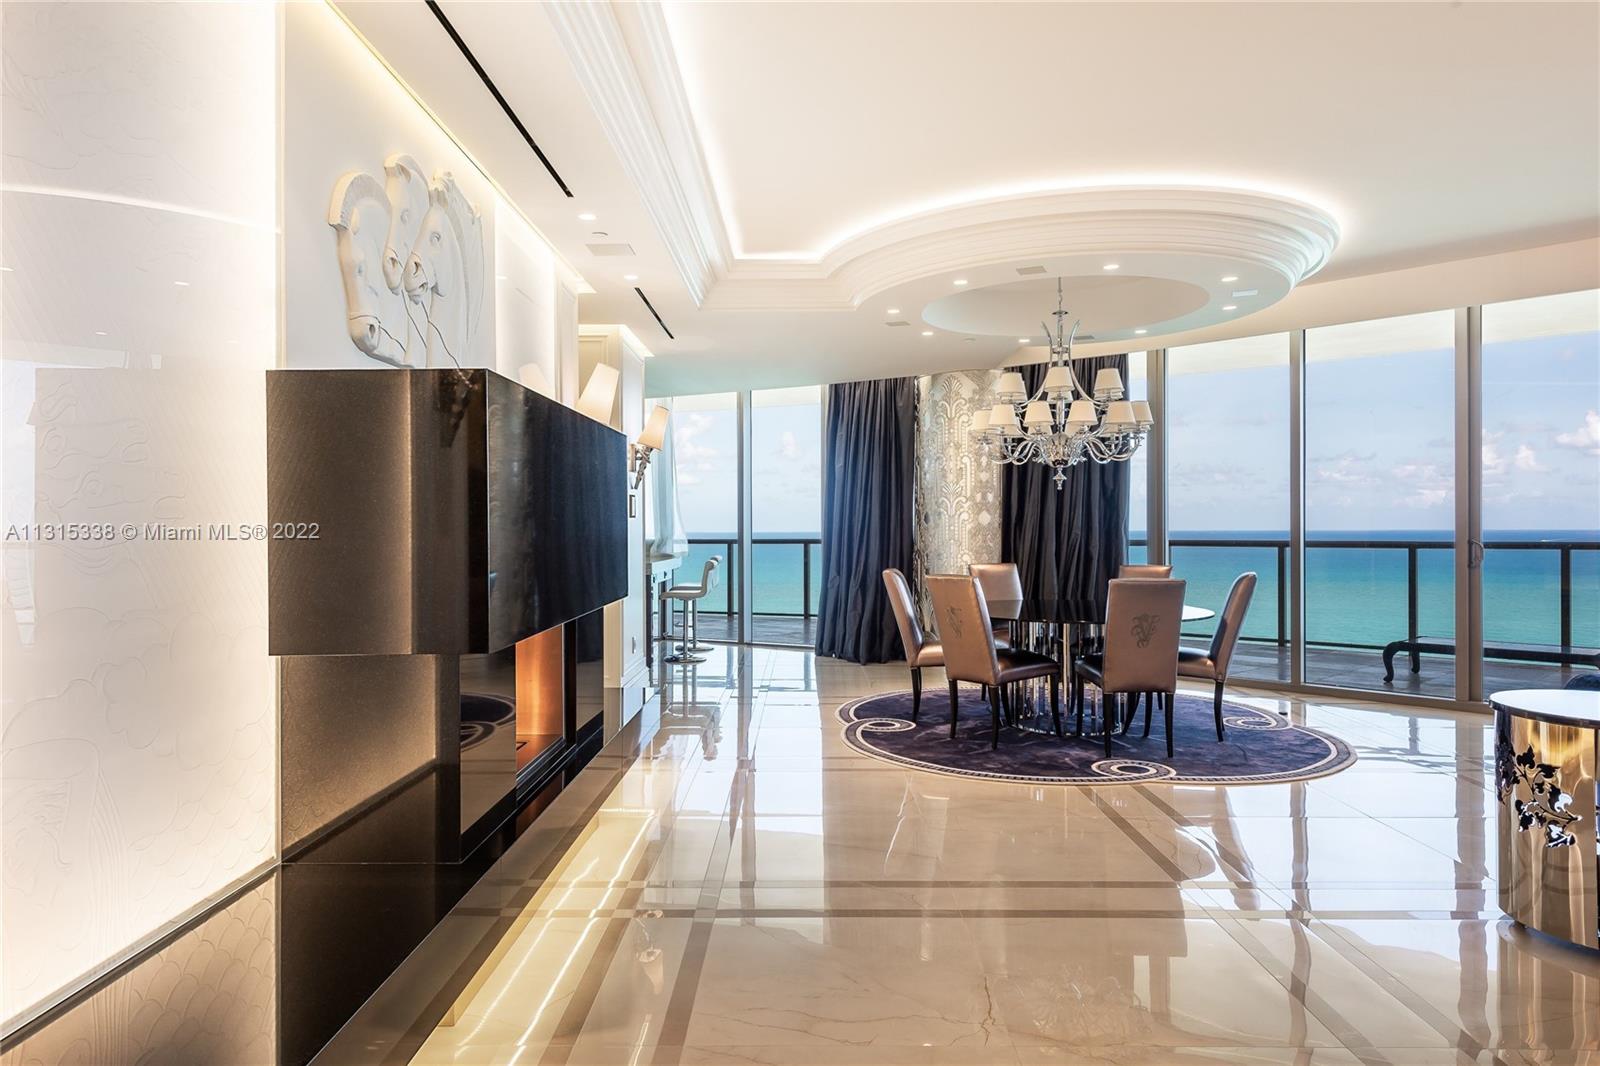 Do not miss the opportunity to own this rare 3/3.5 unit in the famous St. Regis of Bal Harbour. Designed with impeccable taste and style luxury condo offers spacious interior living area, marble floors, ultra sophisticated kitchen and amazing ocean front view. Fully automated smart home system. Residents enjoy VIP access to all St. Regis hotel amenities, world class spa/gym, cabanas, 24 hour concierge, valet parking, housekeeping, restaurants, room service, chef and white glove butler services.